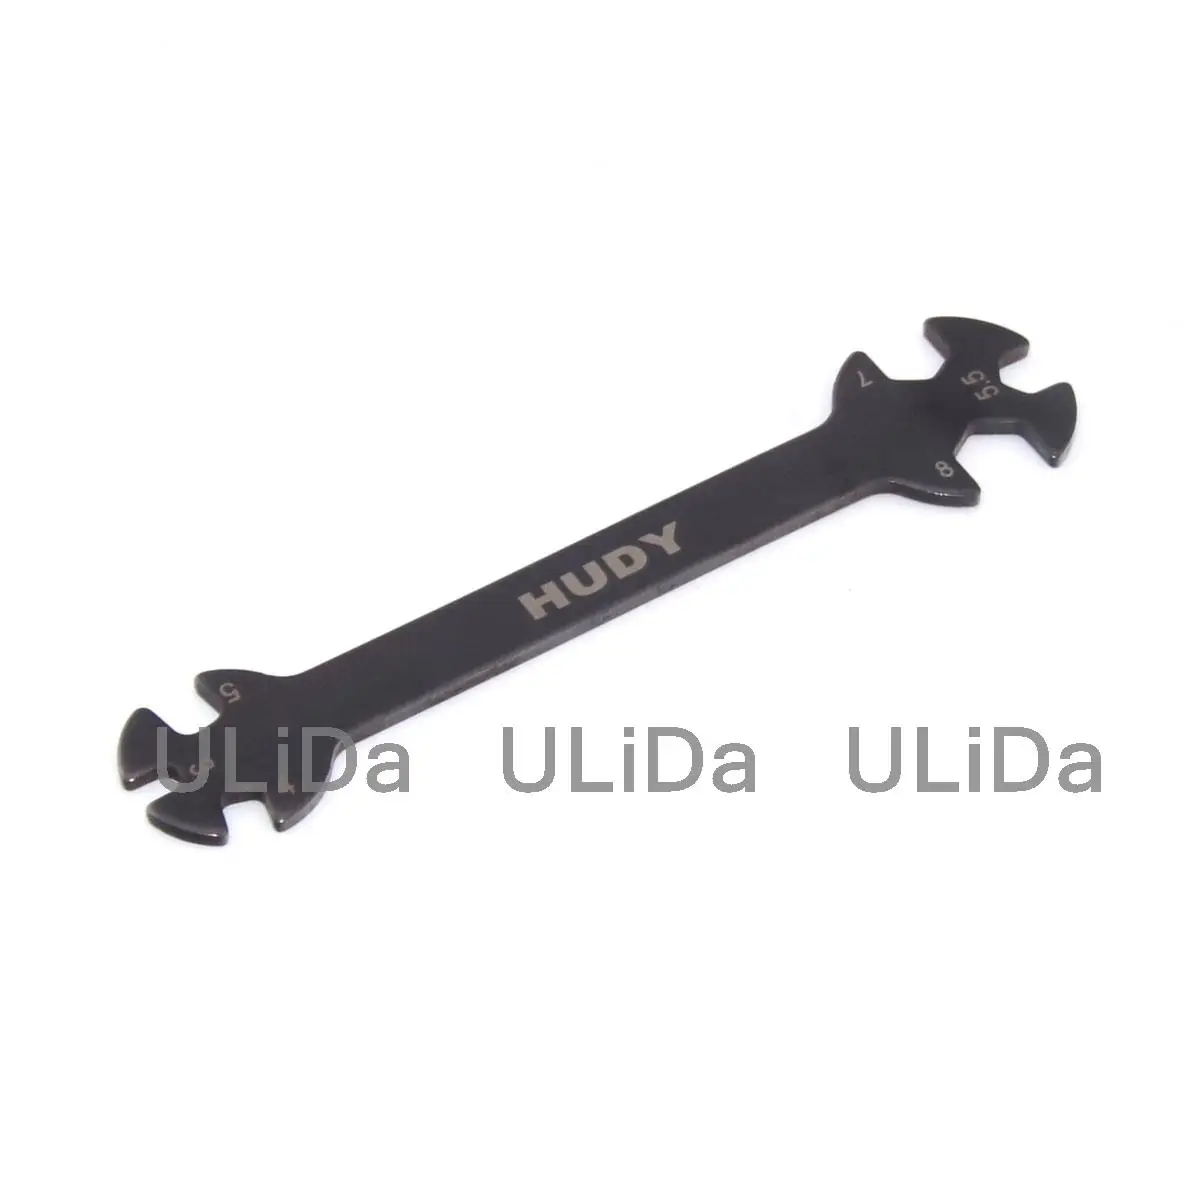 Hudy Special Tool Wrench For Turnbuckles & Nuts DY181090 3 4 5.5 7 8MM For 1/5 1/8 1/10 M3 M4 M5.5 M7 M8 Nut Screw RC Car Parts